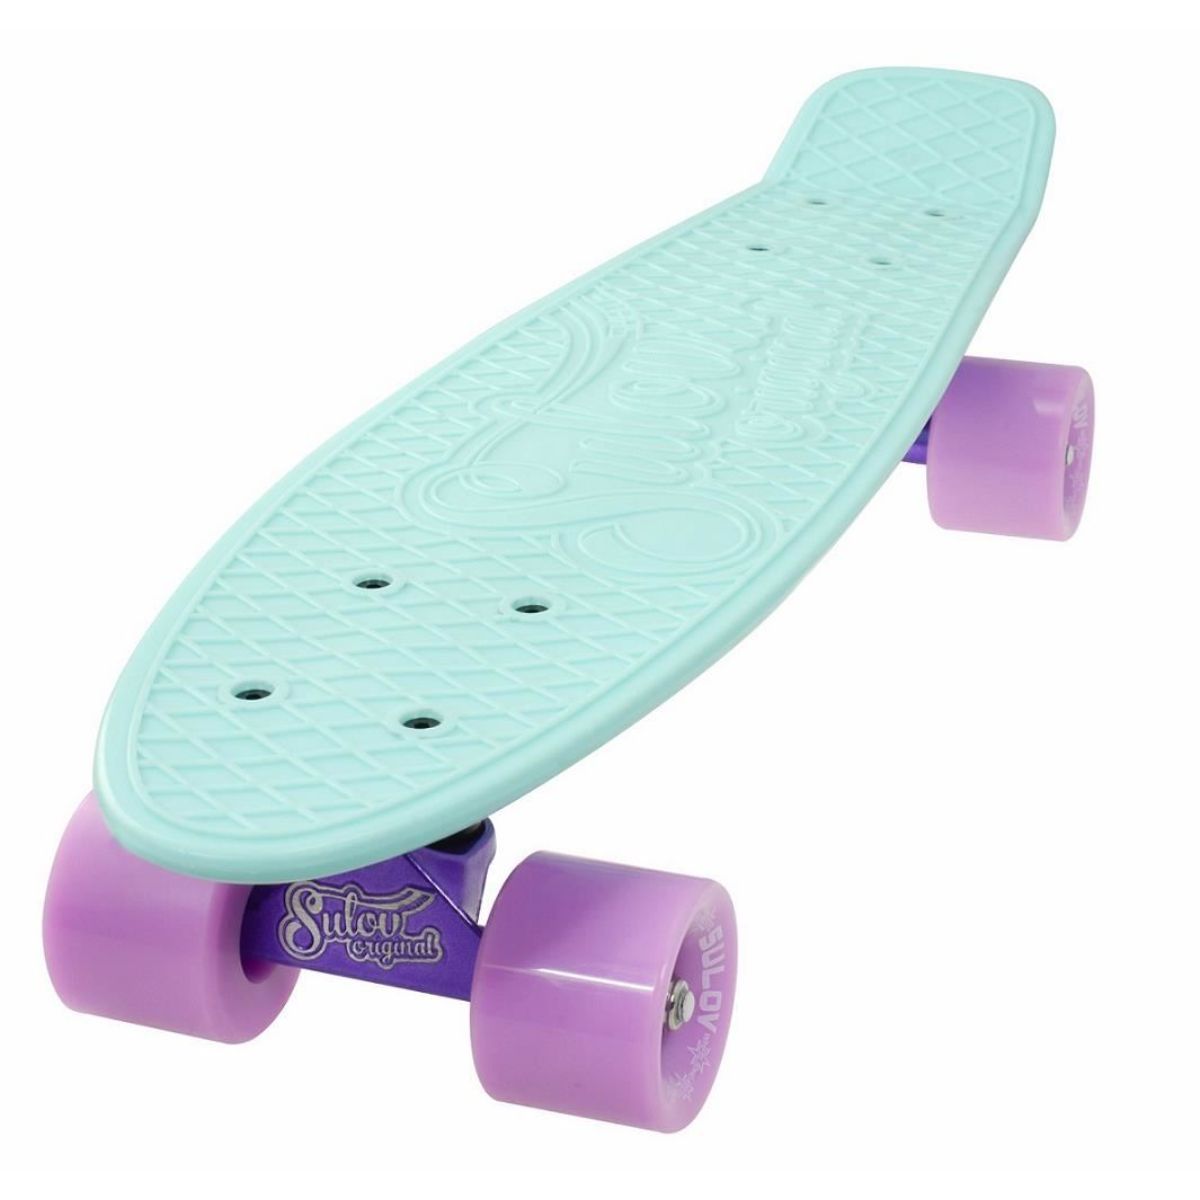 Penny board 22 inch DHS, Pastel, Turcoaz DHS imagine 2022